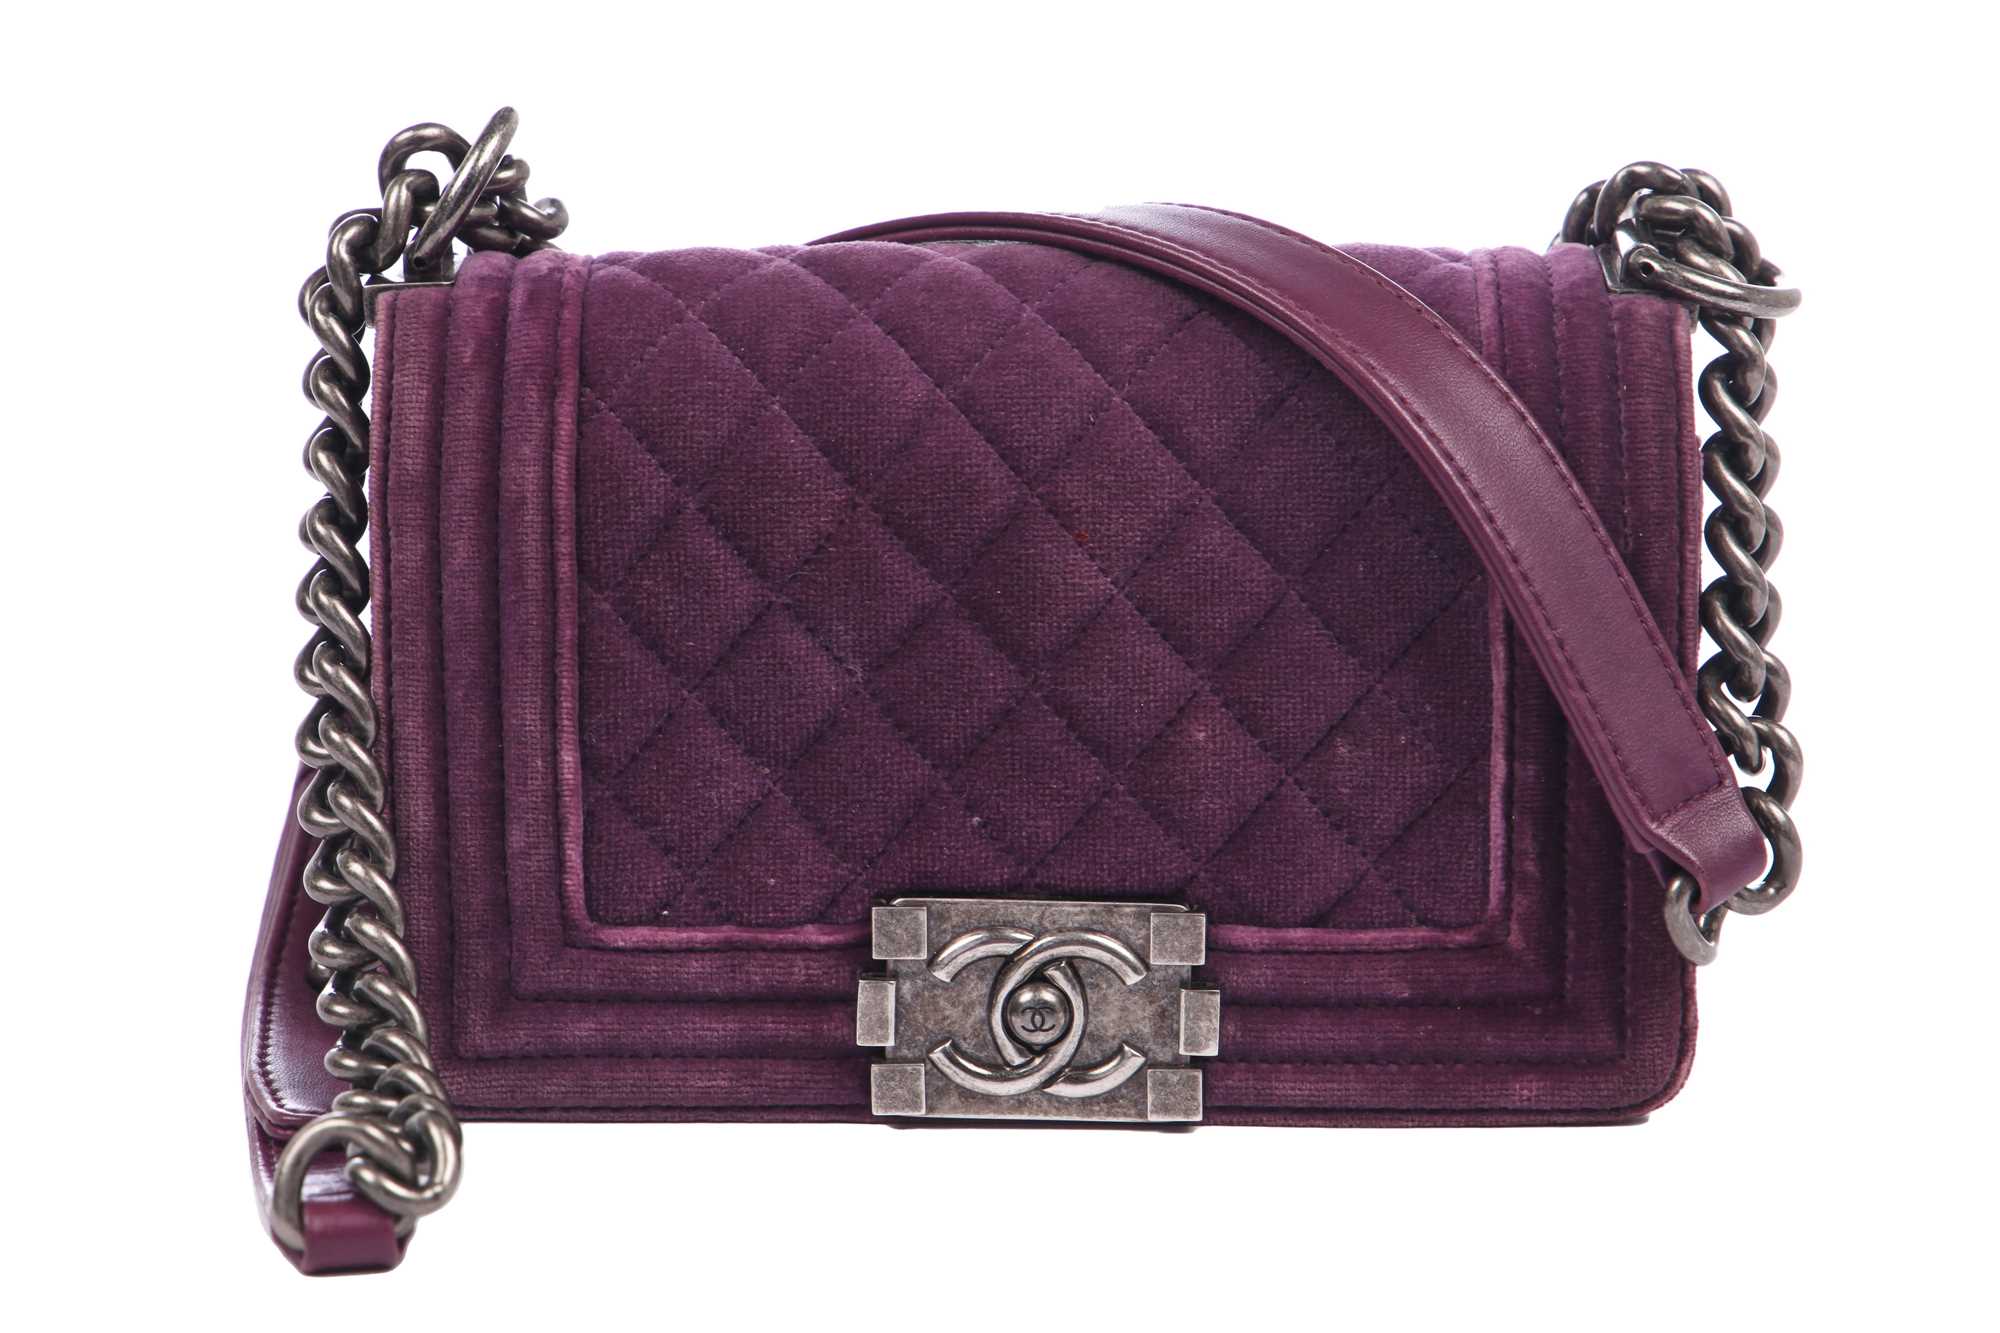 Lot 6 - A Chanel quilted purple velvet and leather small Boy bag, 2013-14